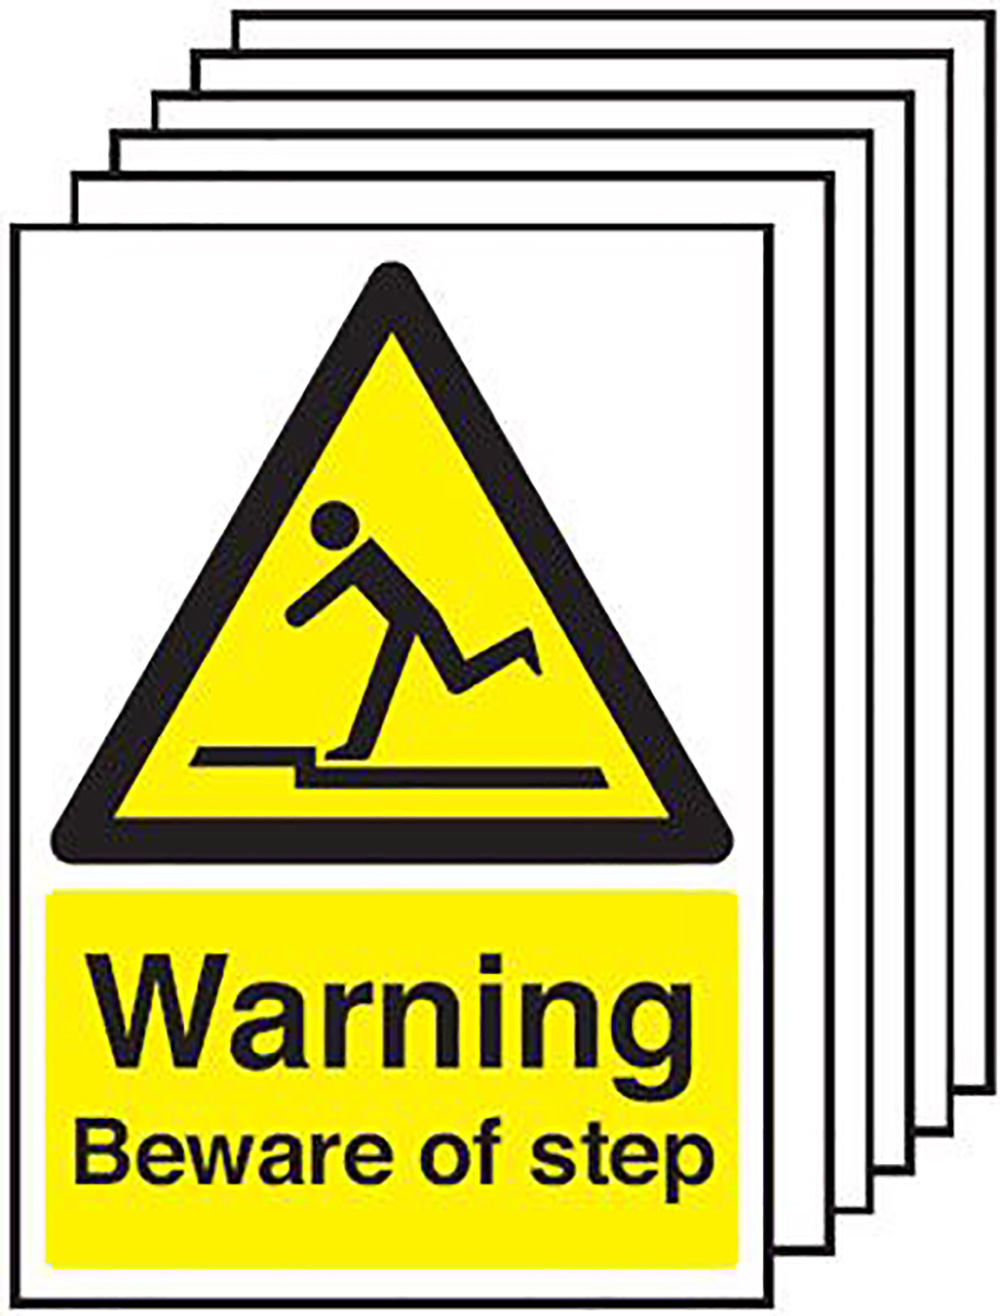 Warning Beware of Step  297x210mm 1.2mm Rigid Plastic Safety Sign Pack of 6 